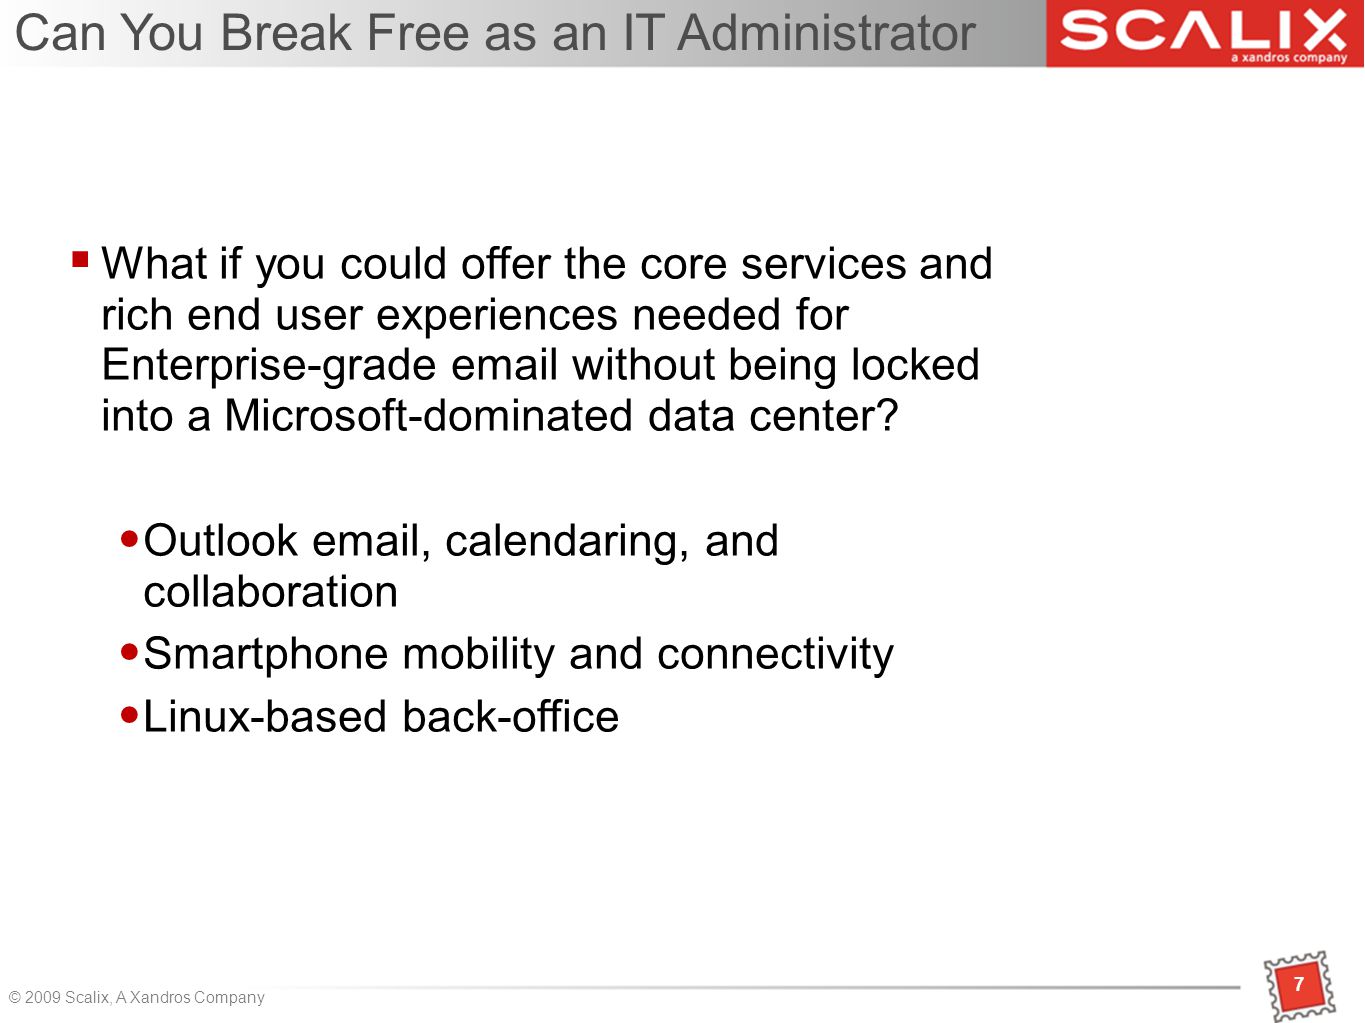 7 © 2009 Scalix, A Xandros Company Can You Break Free as an IT Administrator 7  What if you could offer the core services and rich end user experiences needed for Enterprise-grade  without being locked into a Microsoft-dominated data center.